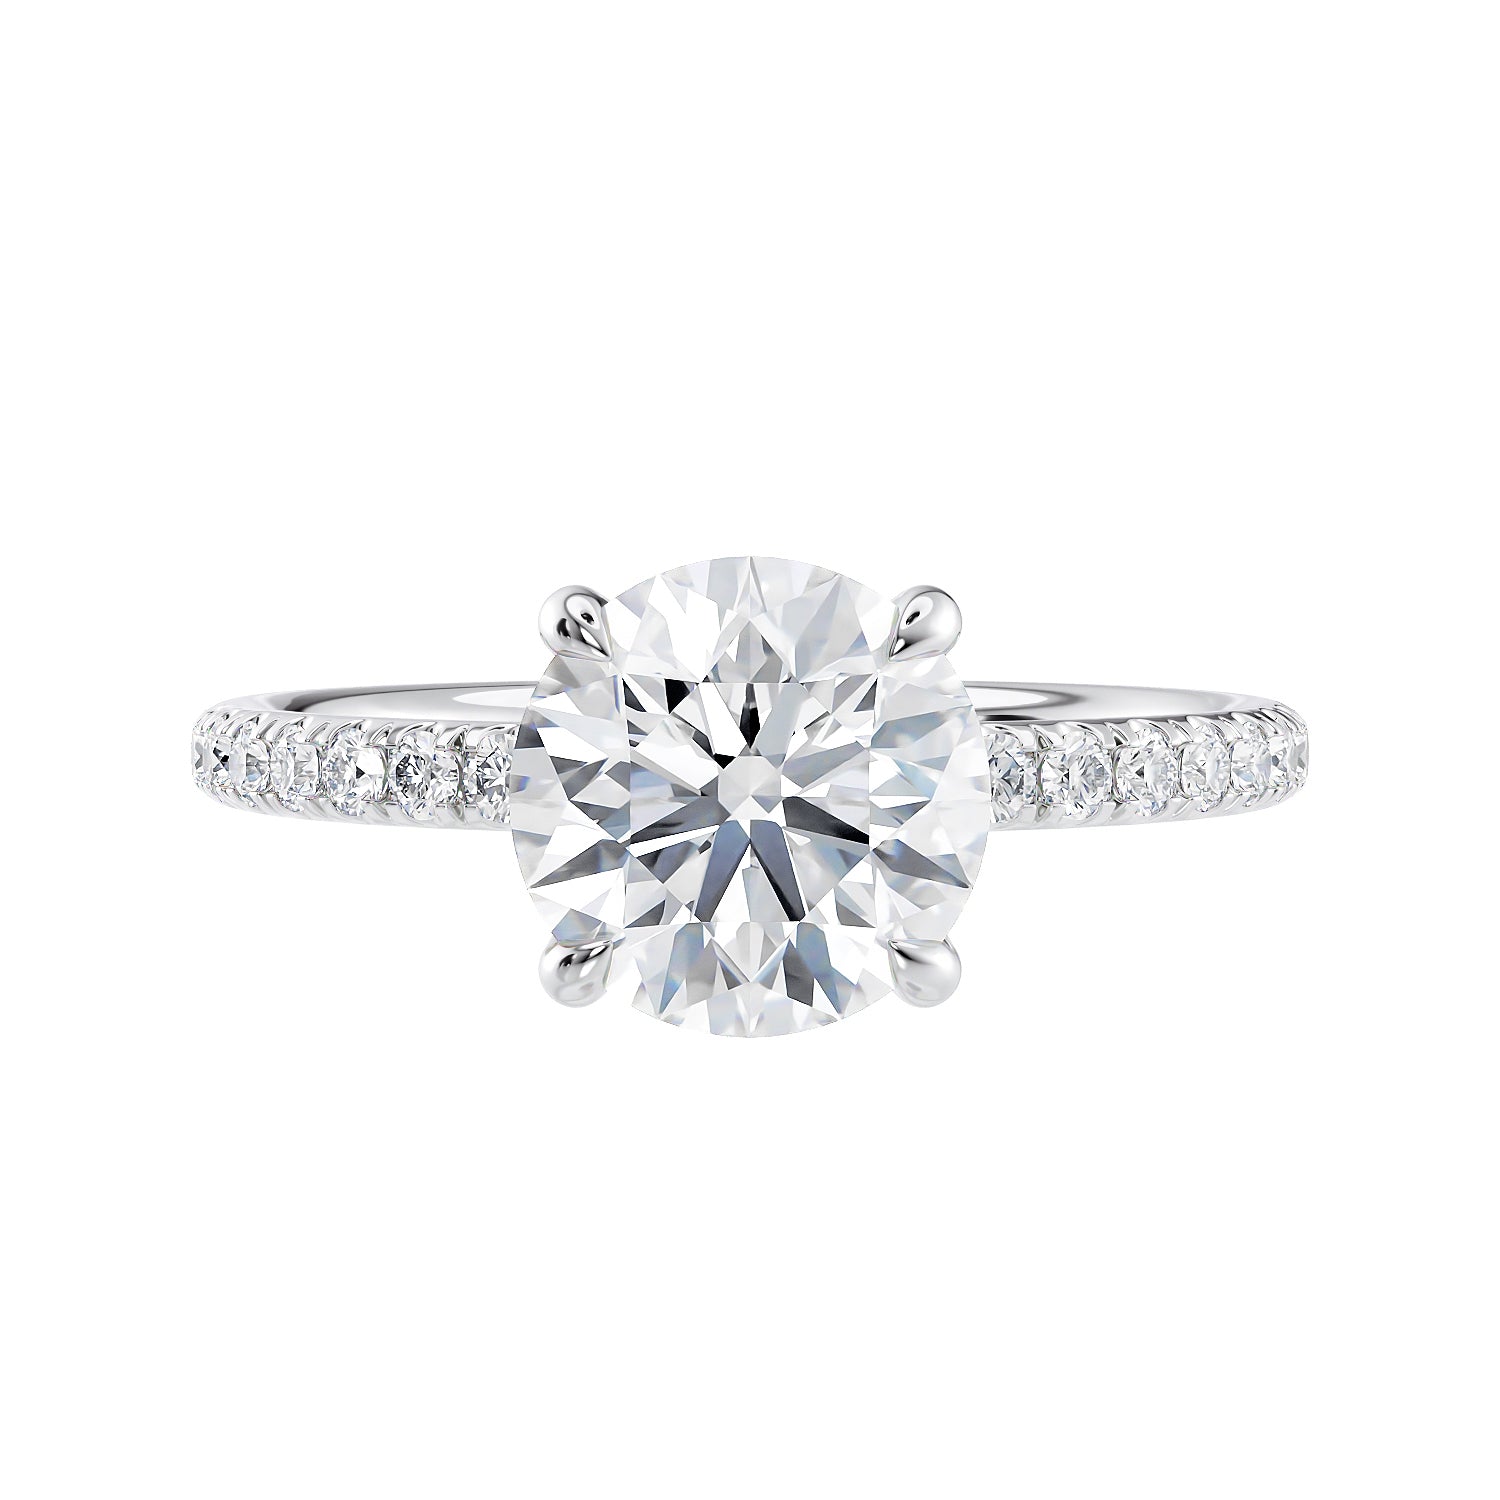 Solitaire diamond engagement ring with diamond band white gold front view.